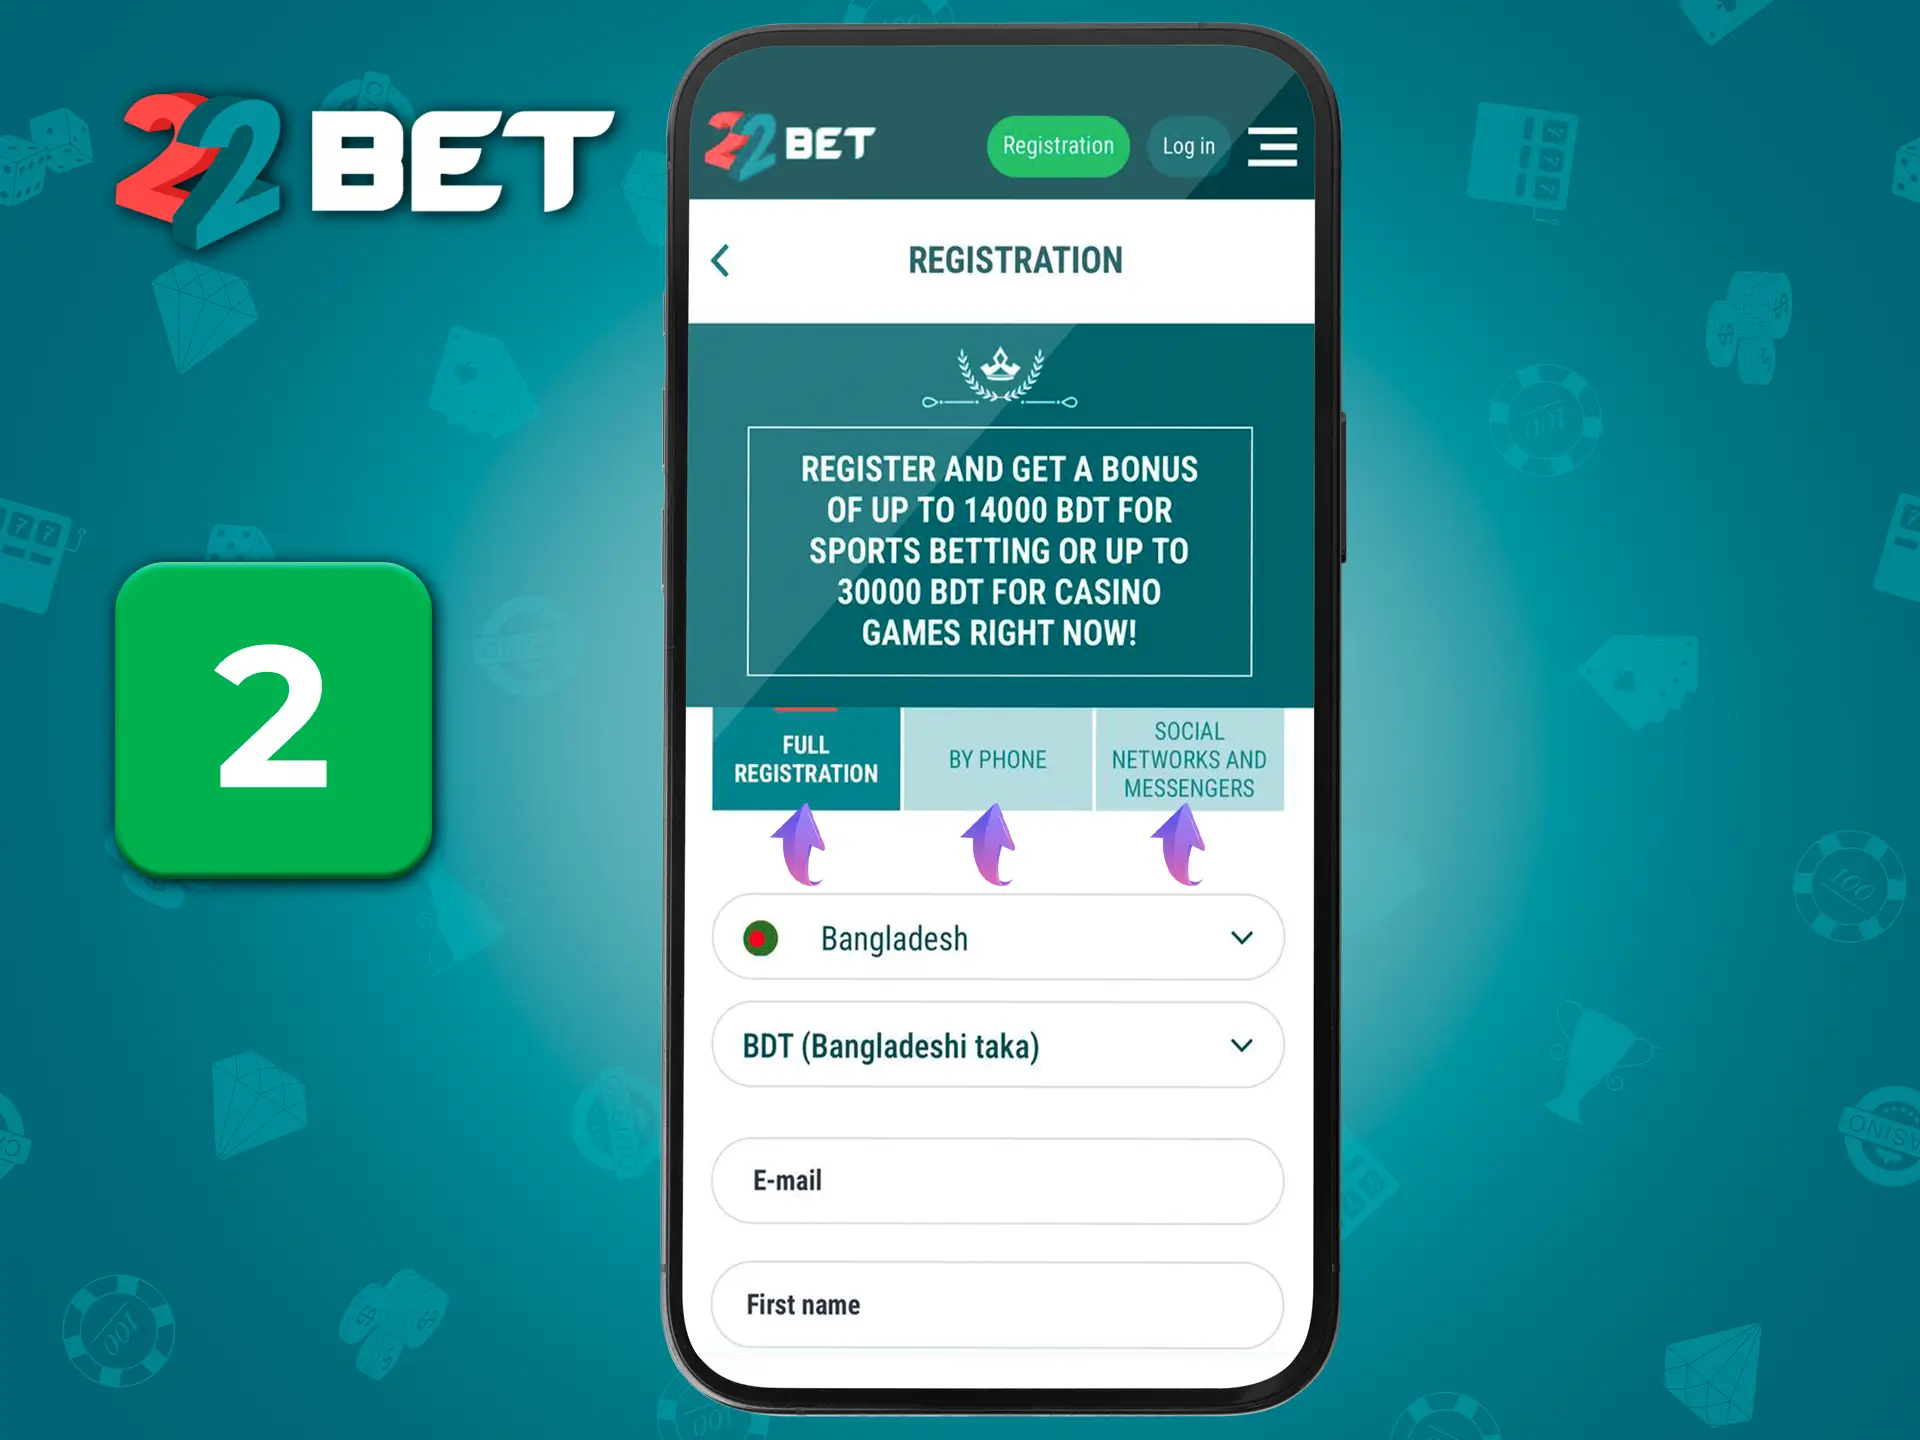 Fill out the simple and straightforward form to register at 22Bet Casino.